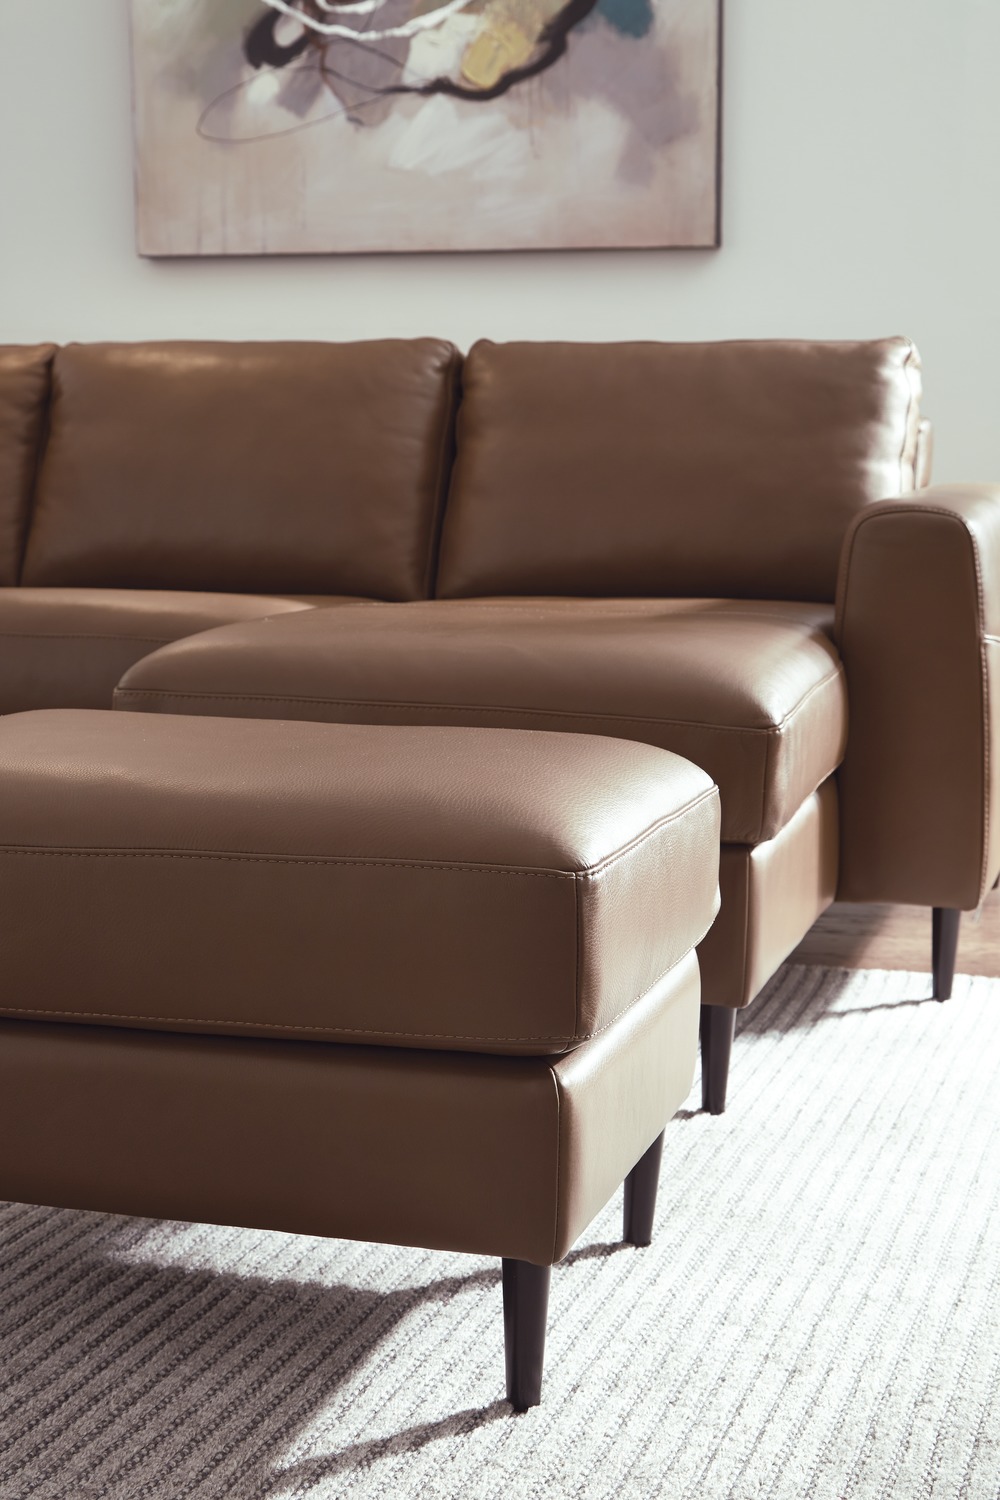 Palliser Atticus Leather Sectional, Palliser Leather Couch